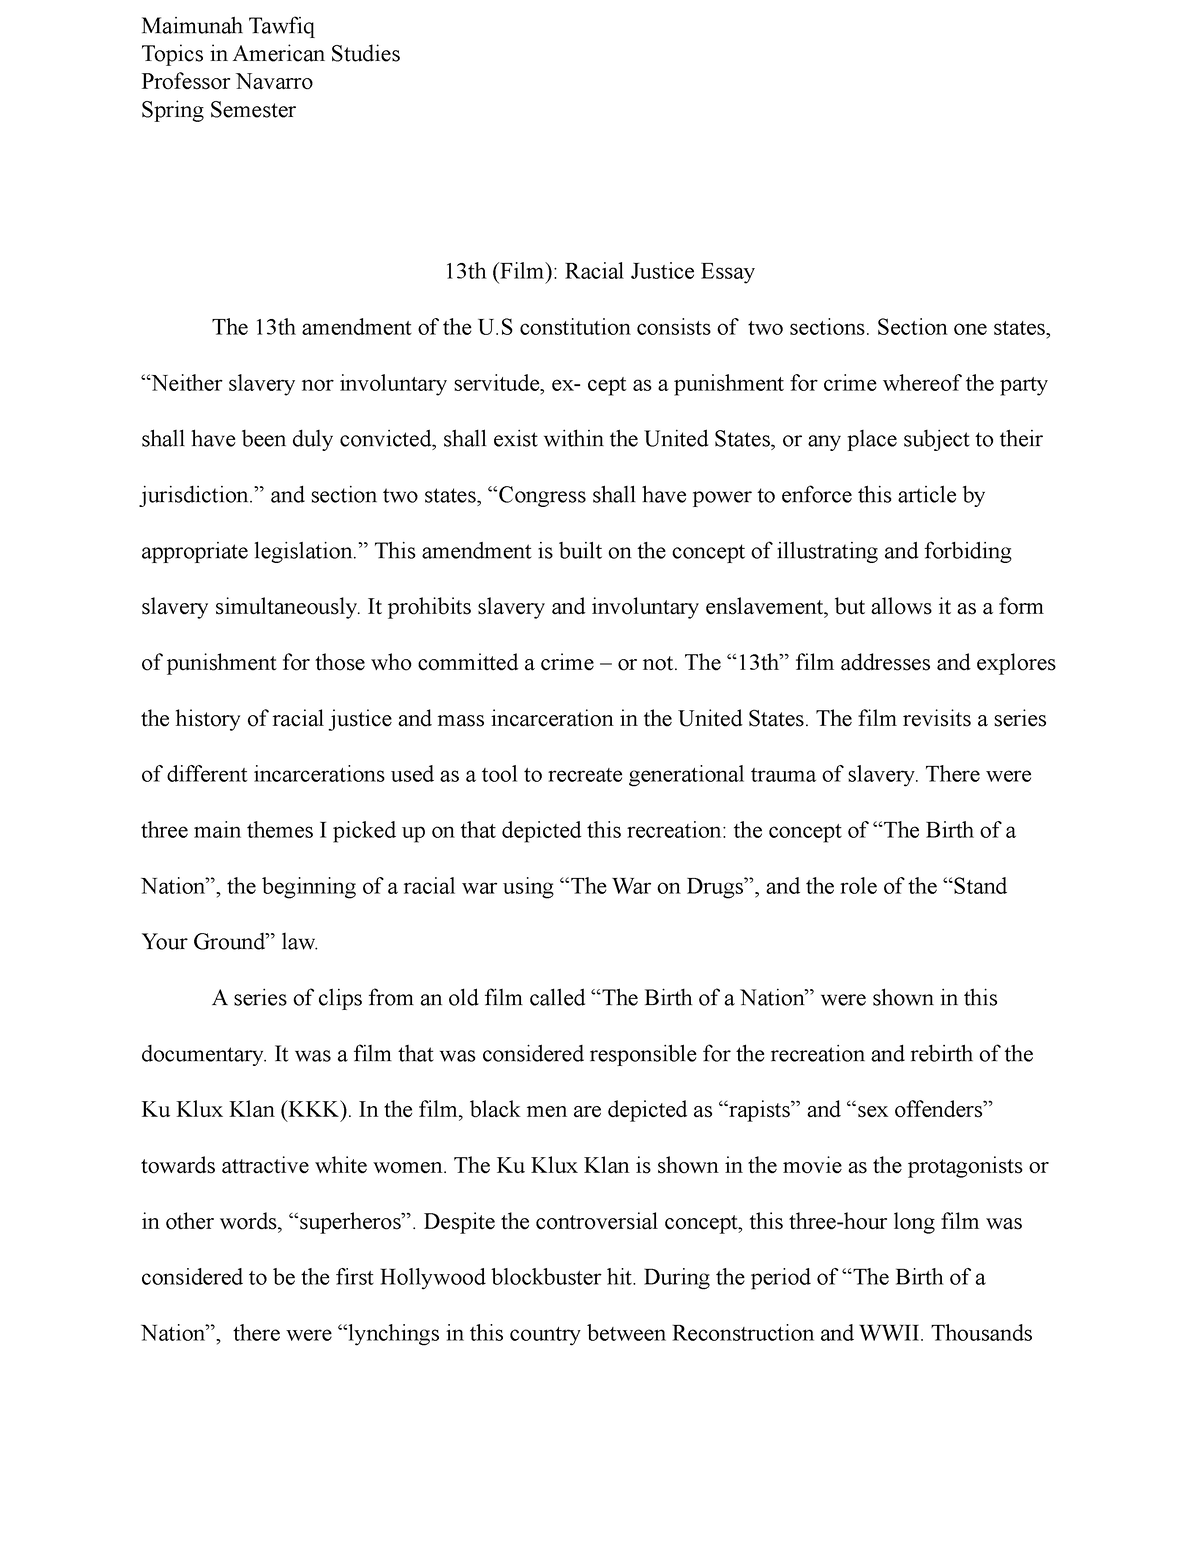 essay about racial justice